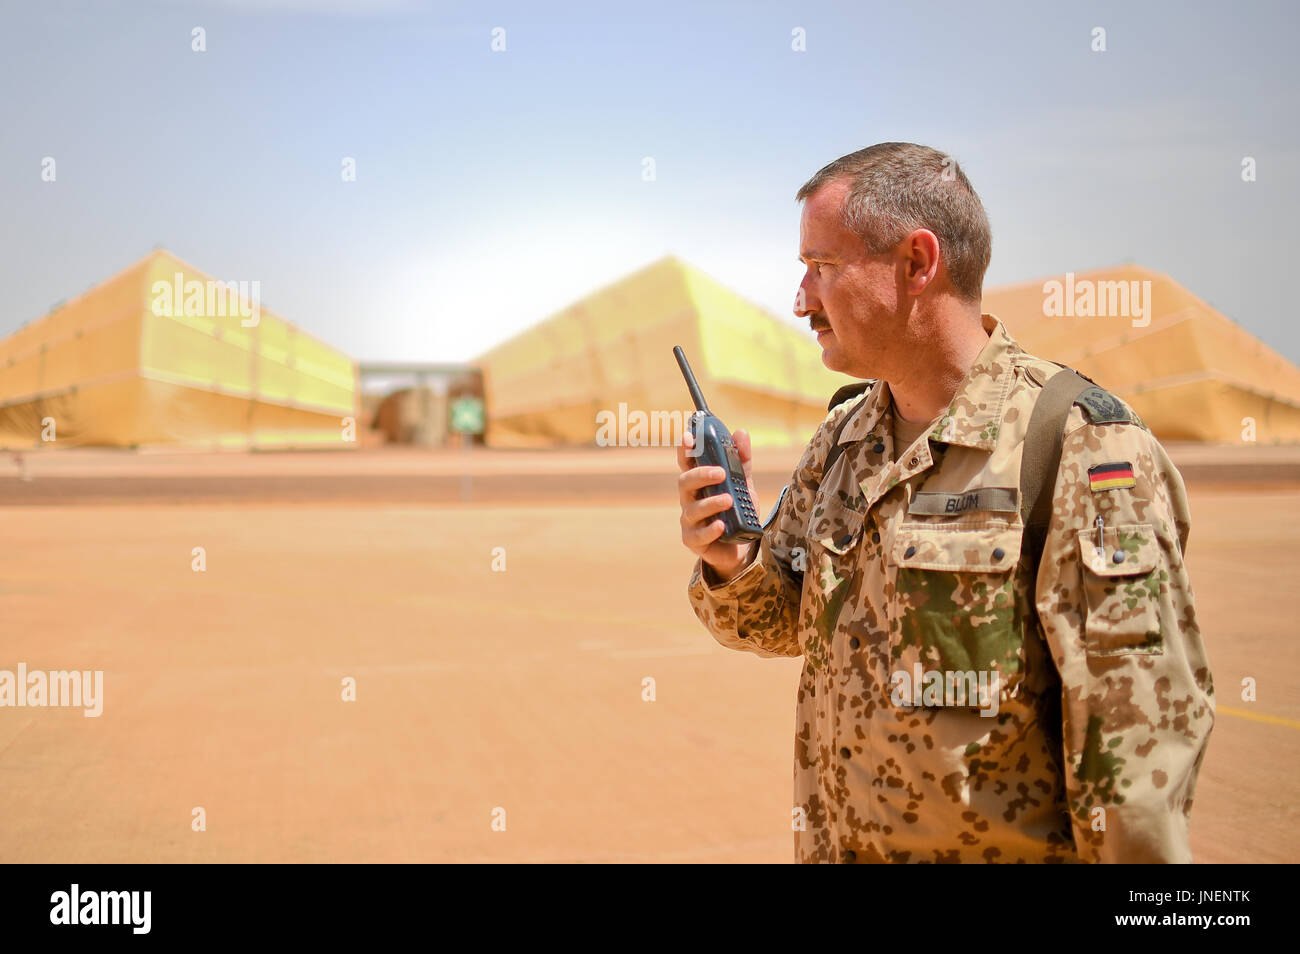 Gao, Mali. 30th July, 2017. Thomas Blum, (Kommandeur gemischter Heeresflieger), speaking into his walkie talkie in front of the hanger for Tiger attack helicopters on the airfield at Camp Castor in Gao, Mali, 30 July 2017. Photo: Britta Pedersen/dpa/Alamy Live News Stock Photo